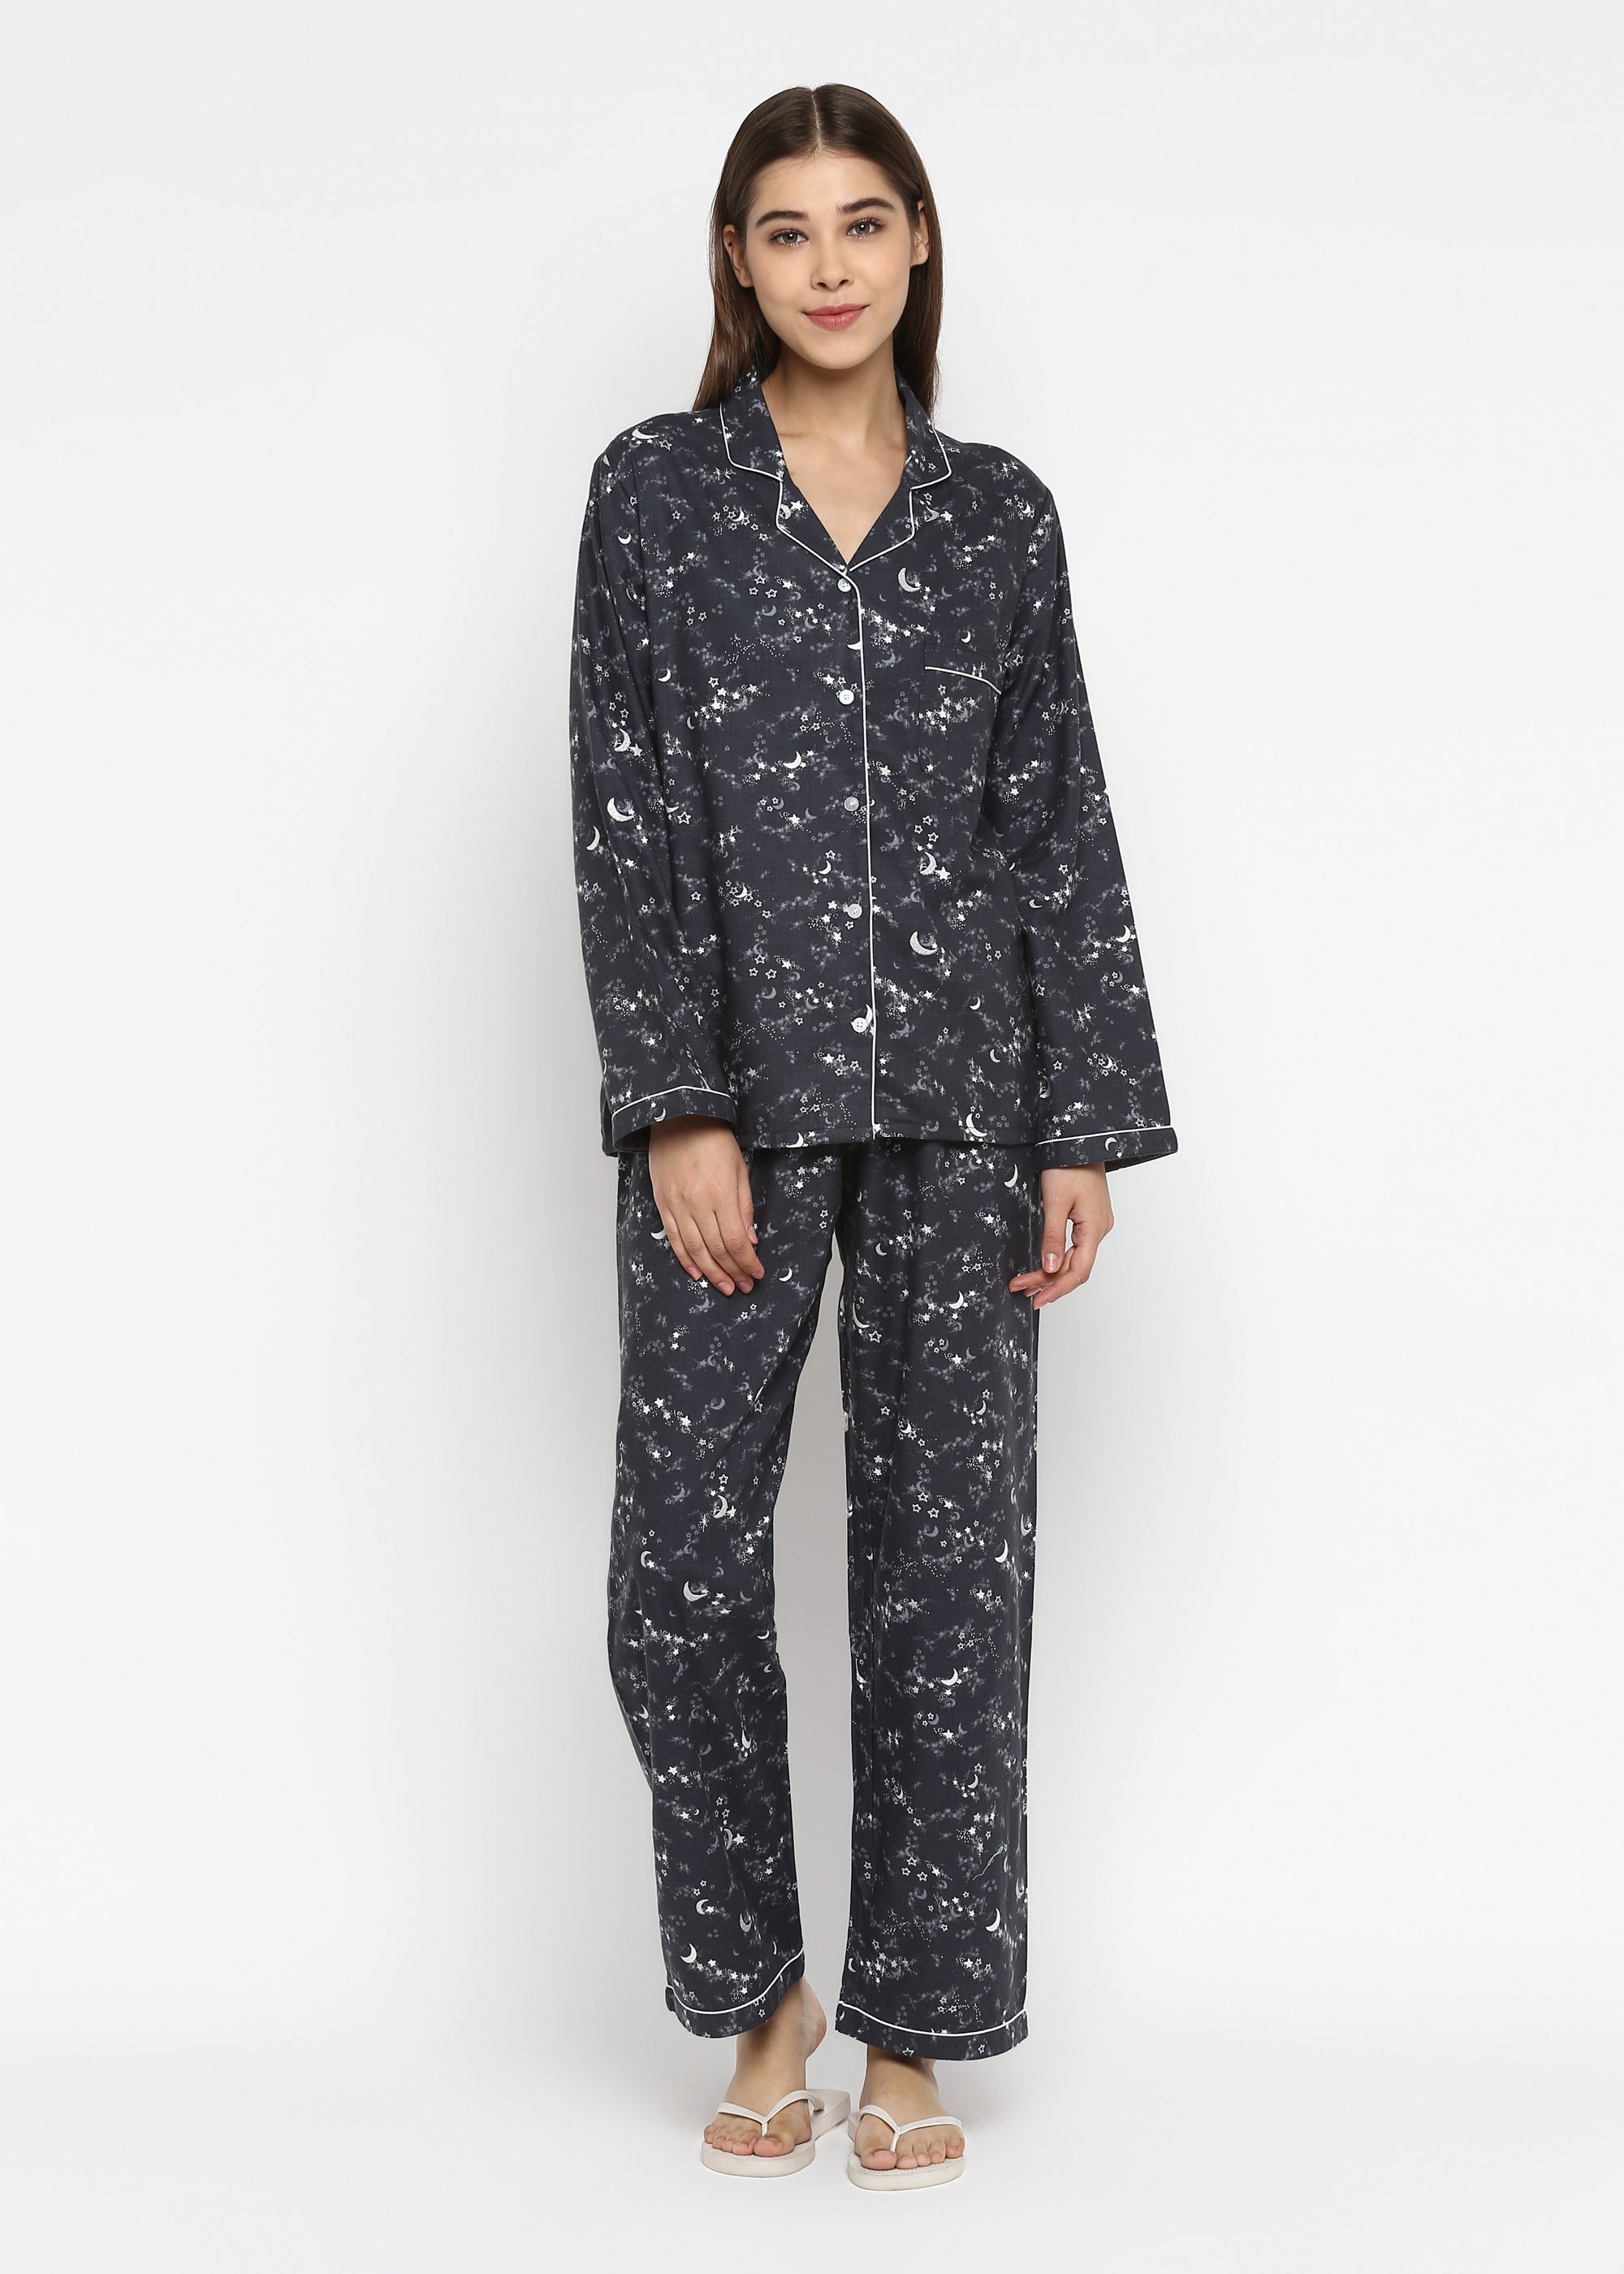 Grey Star and Moon Print Cotton Flannel Long Sleeve Women's Night Suit - Shopbloom